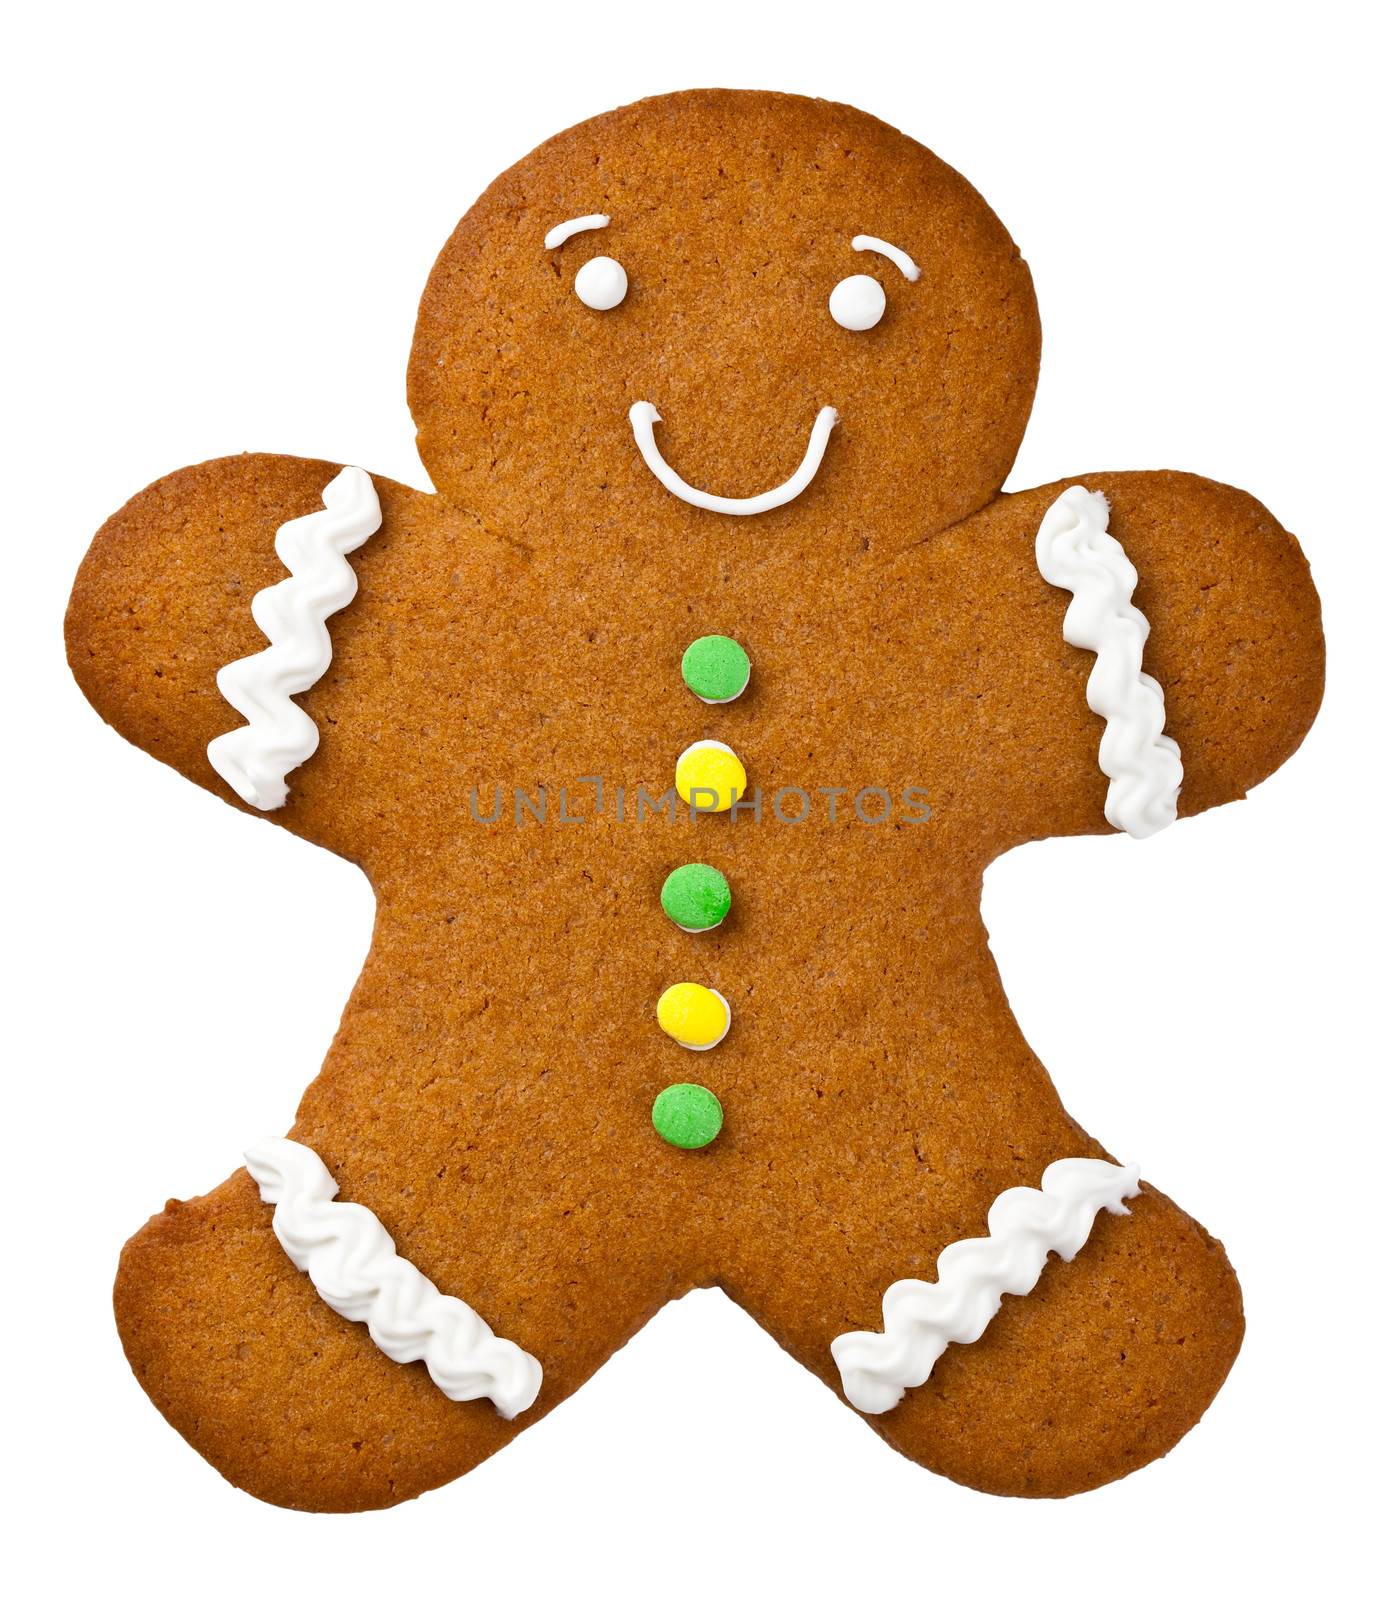 Gingerbread man isolated on white background. Christmas cookie